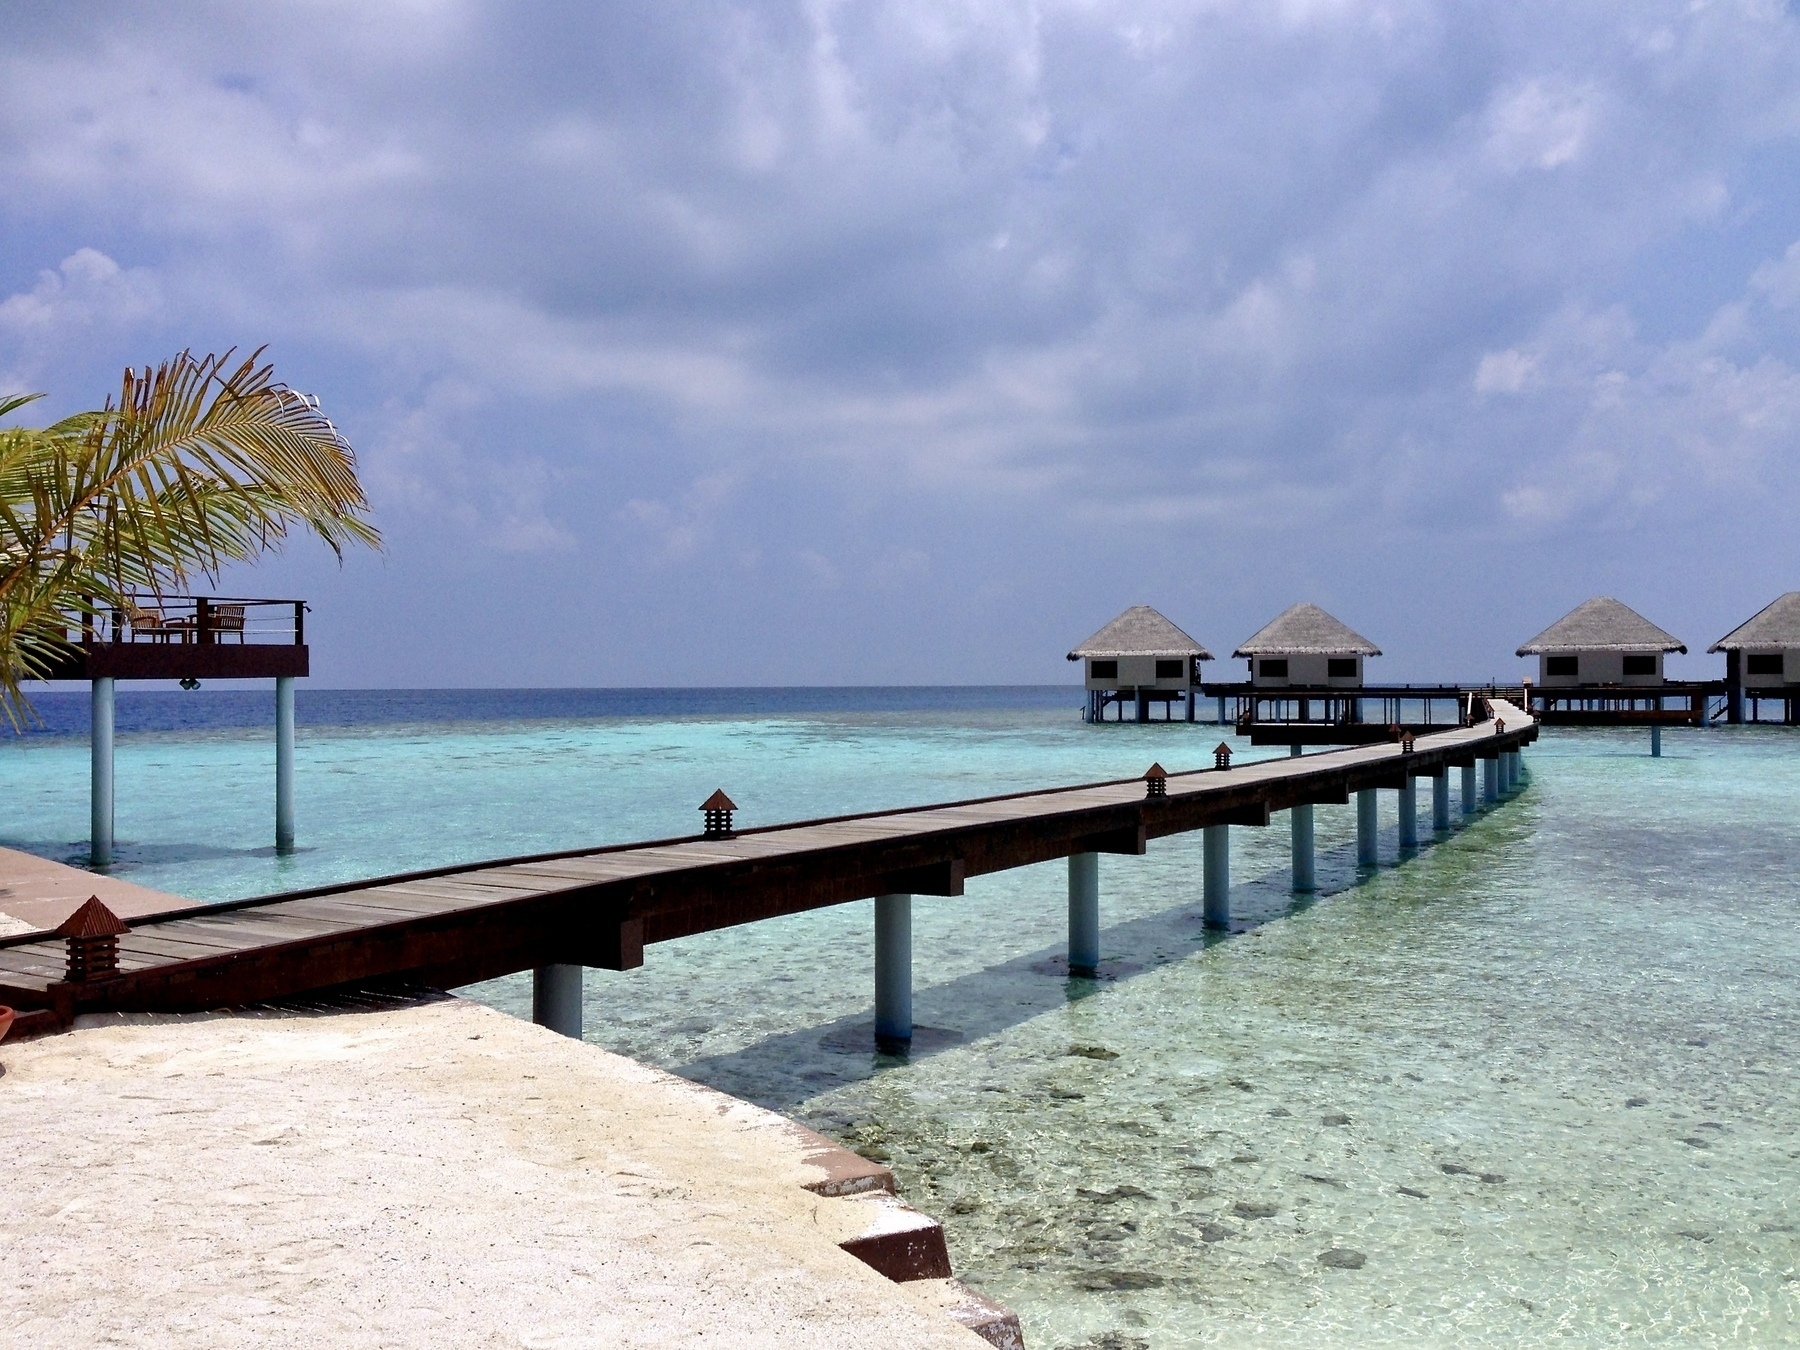 Photo of a pier over the ocean leading to huts, in the Maldives